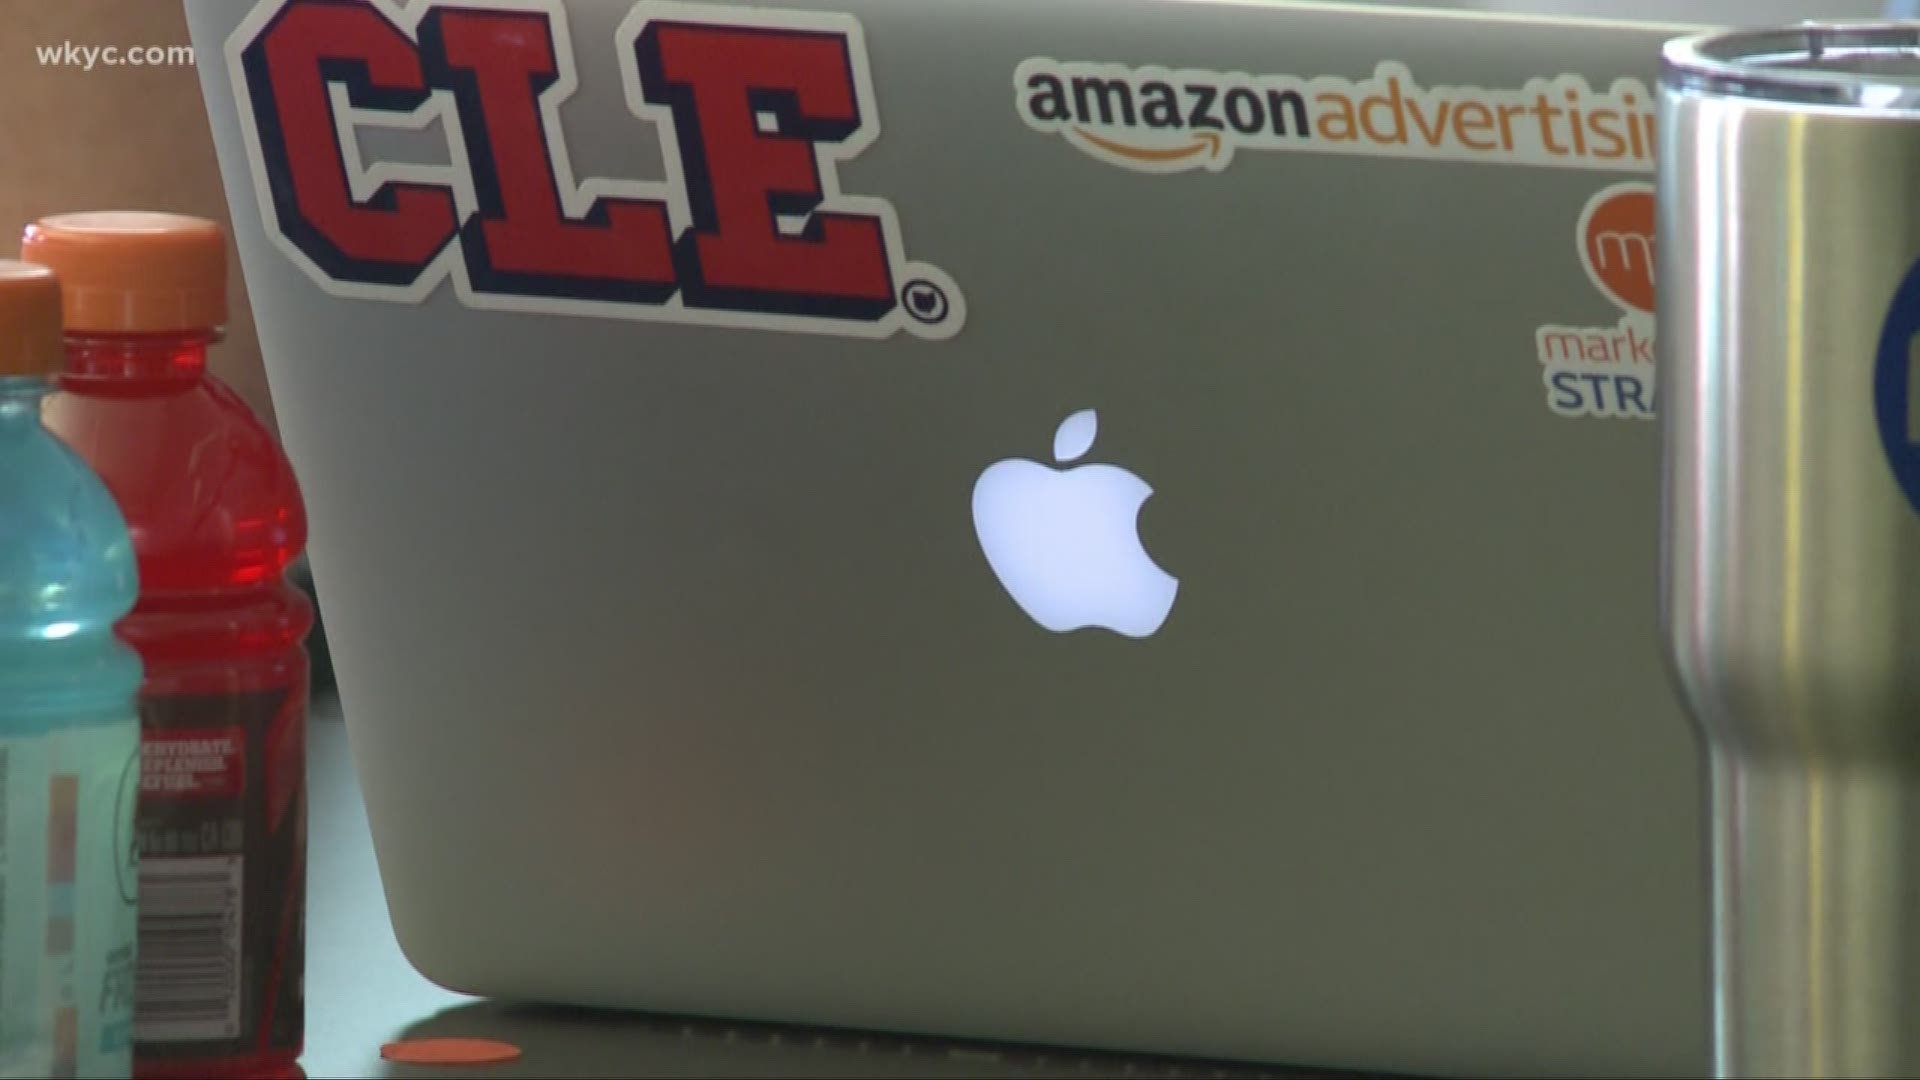 Local company working around the clock to ensure success during Amazon Prime Day